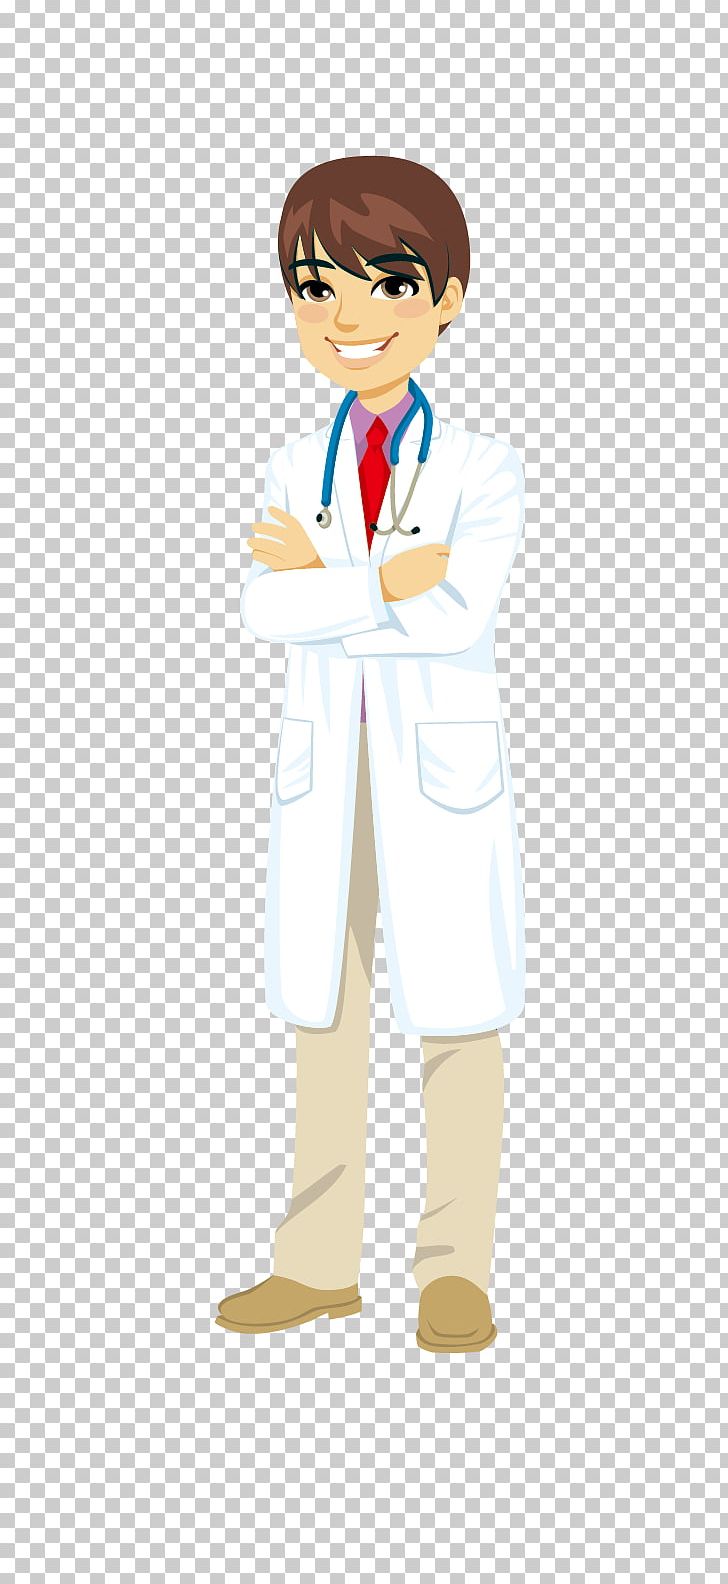 Physician Cartoon Professional Drawing Illustration PNG, Clipart, Arm, Attending Physician, Boy, Cartoon, Cartoon Character Free PNG Download